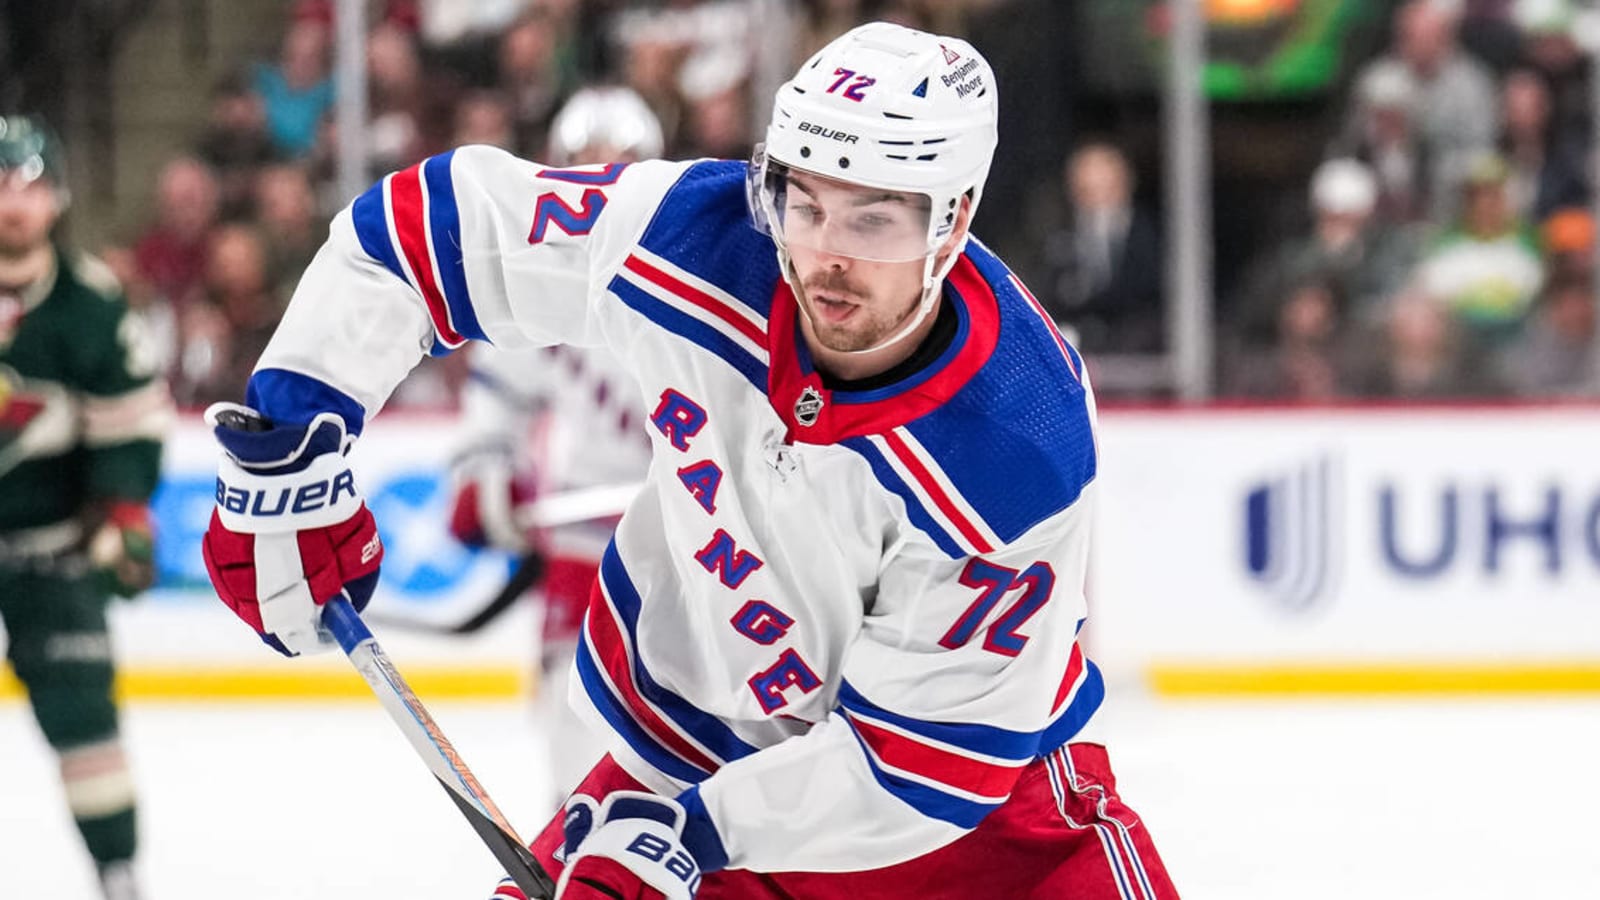 Rangers' Filip Chytil exits game with injury after late hit